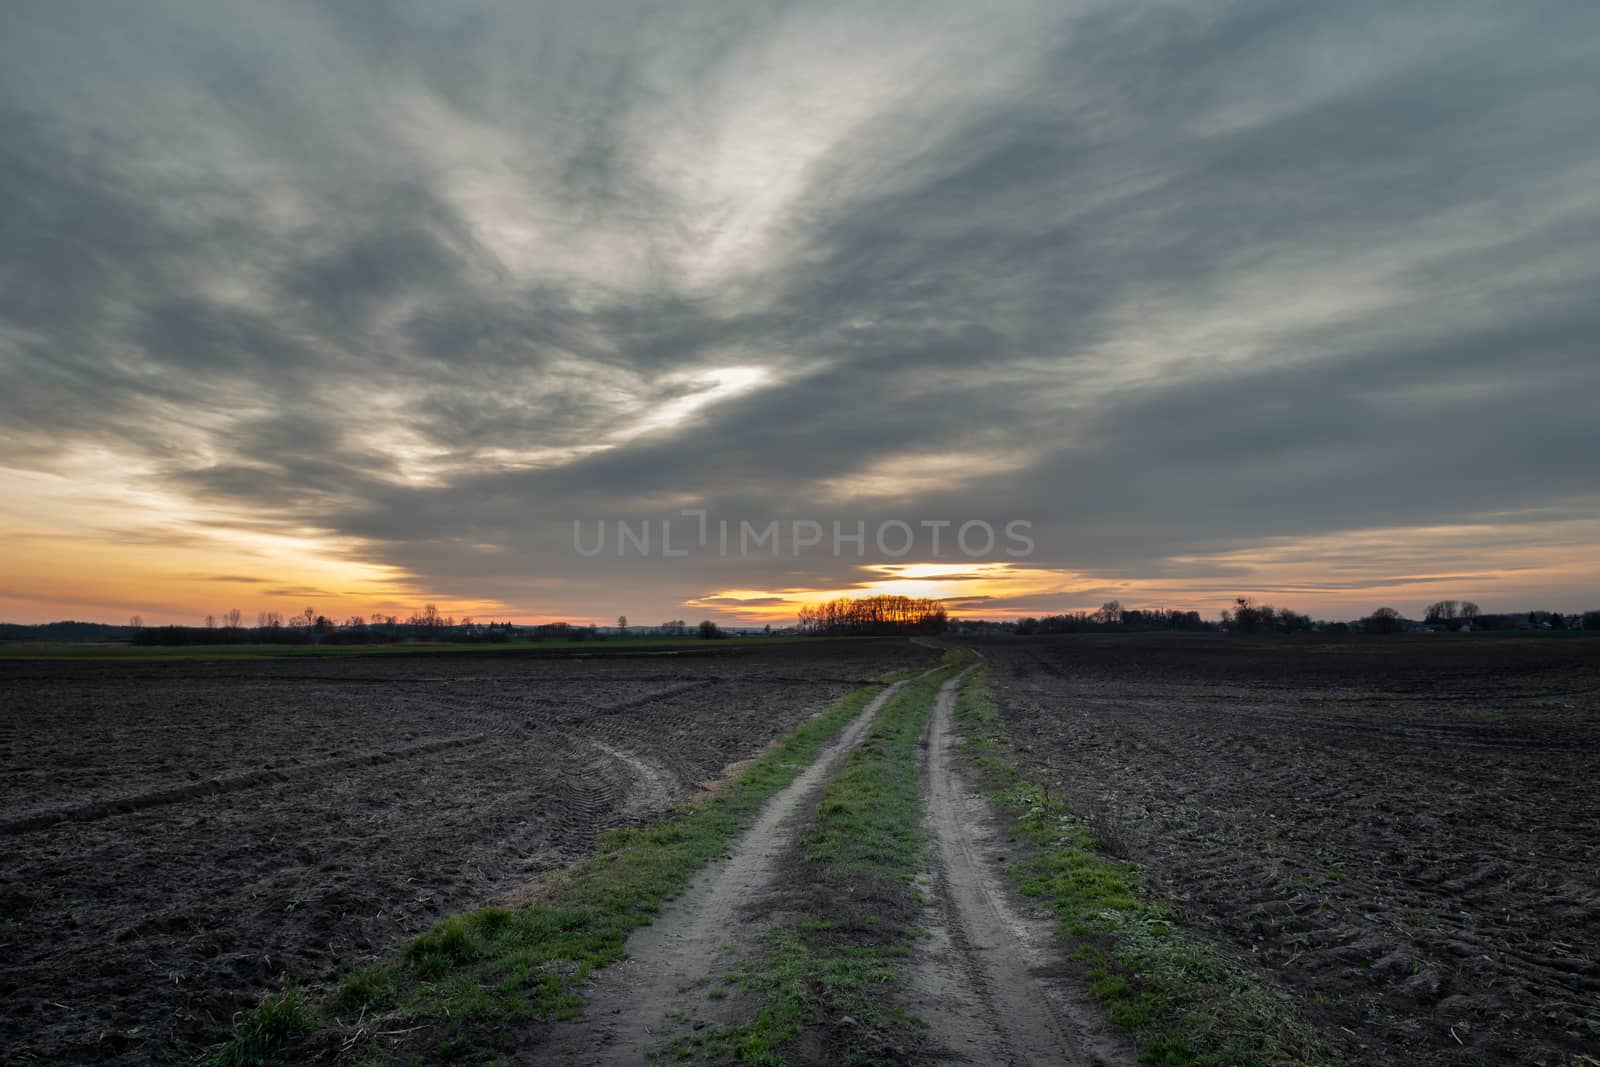 Dirt road through a plowed field and clouds in the sky after sunset